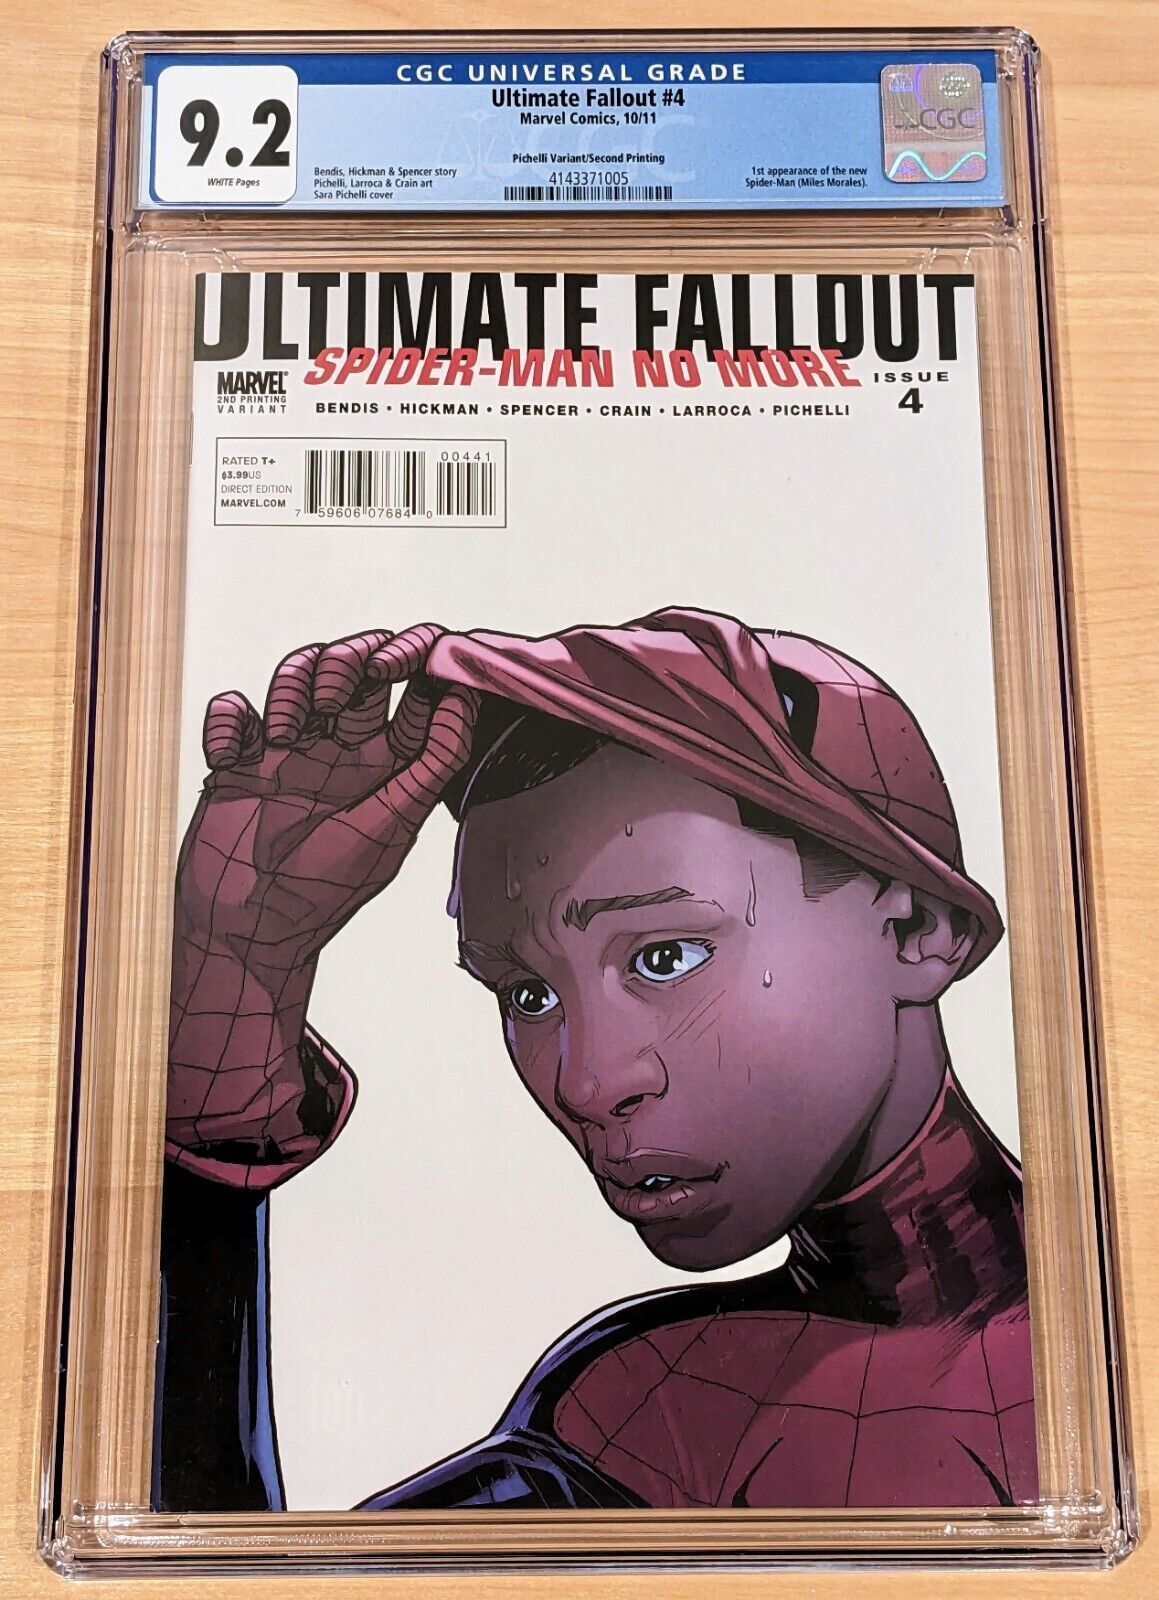 ULTIMATE FALLOUT #4 CGC 9.2 1ST MILES MORALES 2ND PRINT PICHELLI VARIANT 2011